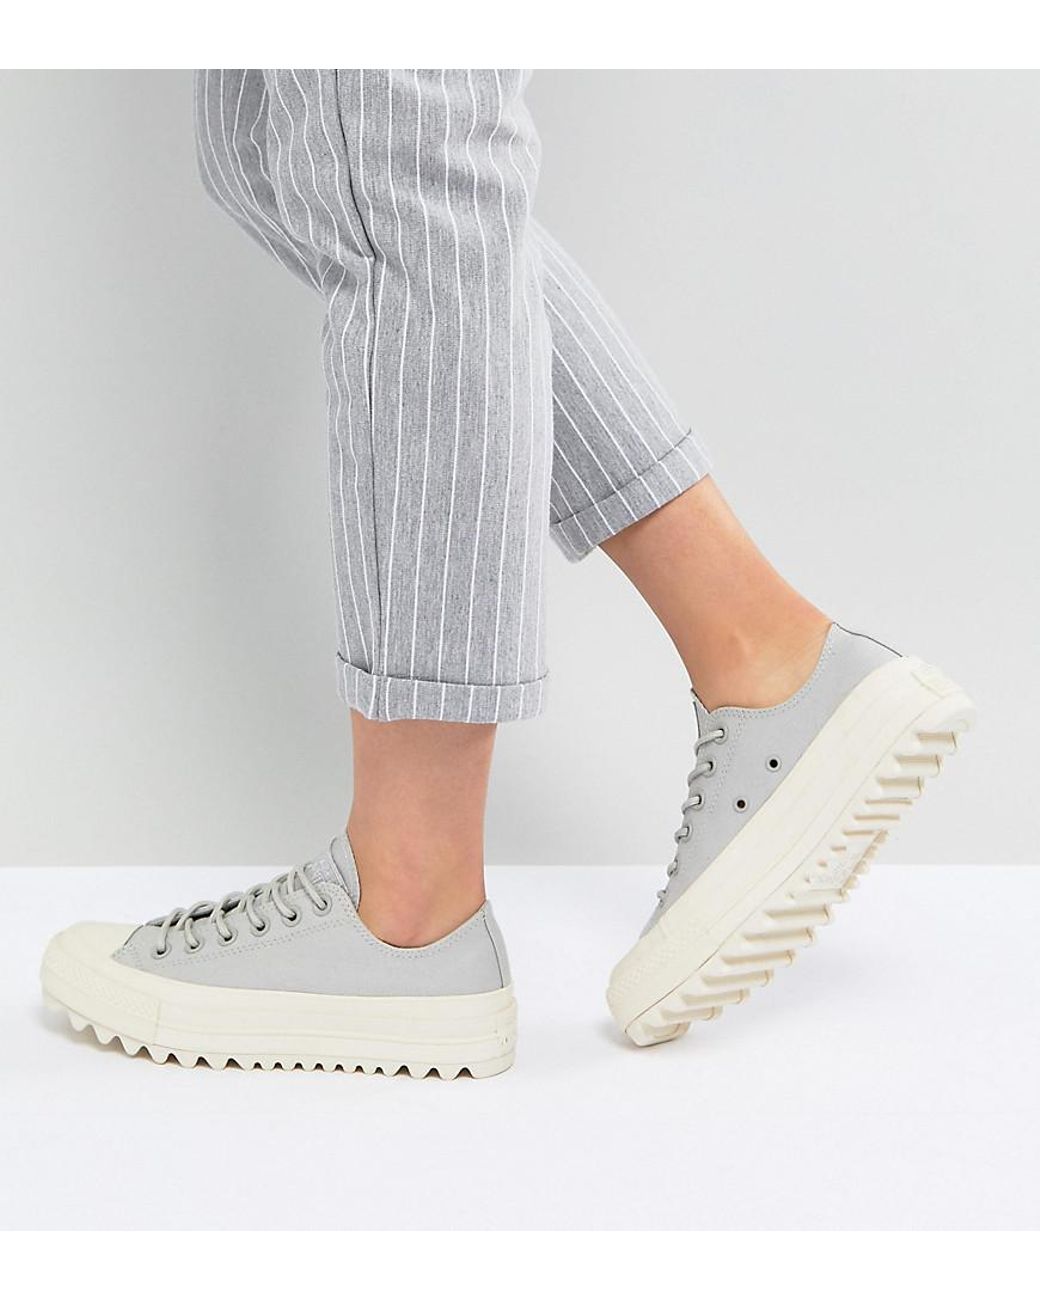 Converse Chuck Taylor All Star Lift Ripple Ox Sneakers In Pale Gray | Lyst